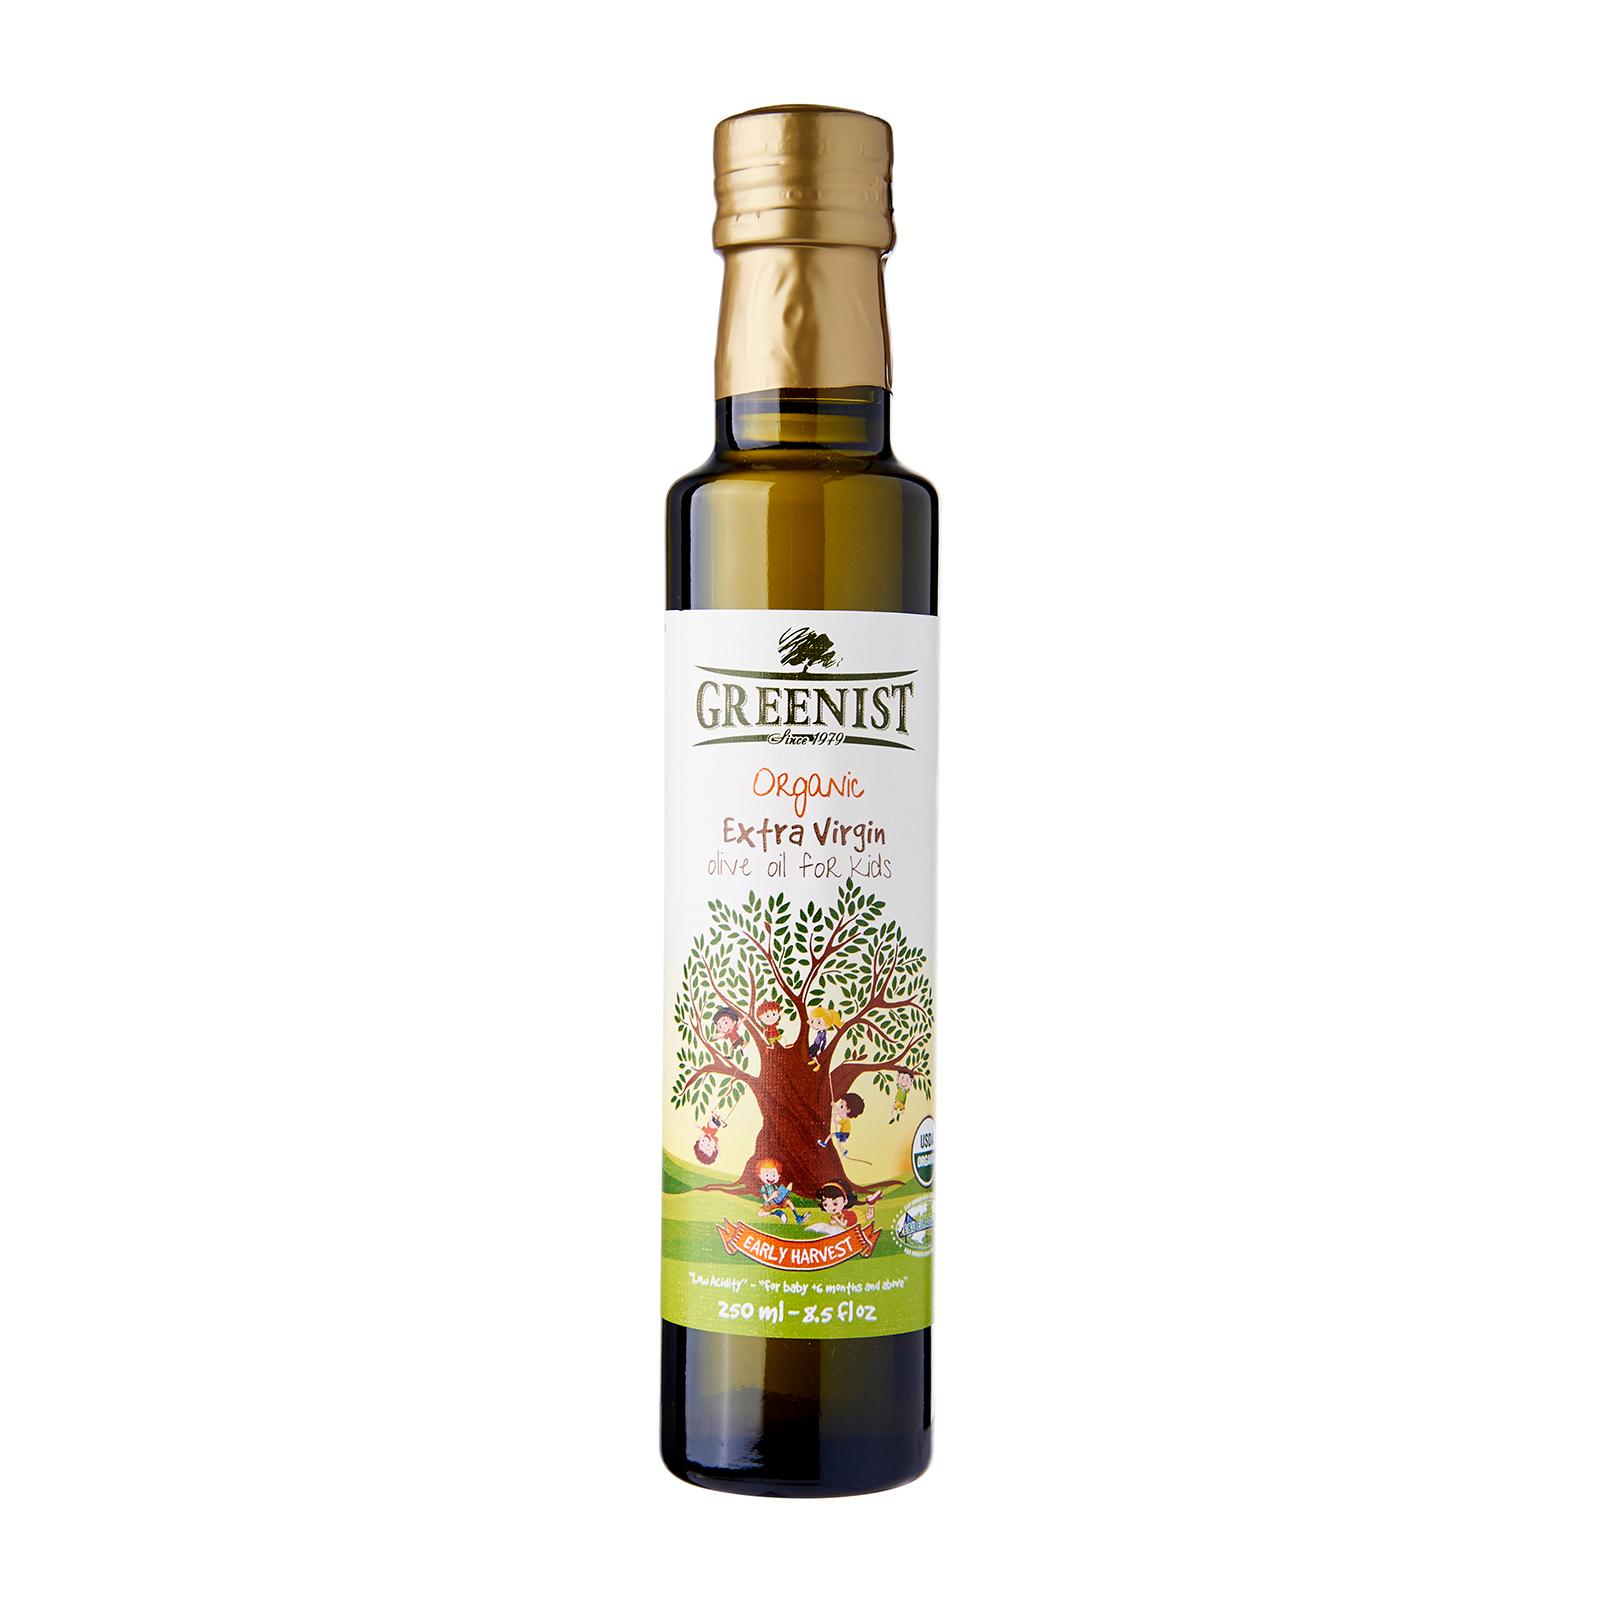 Organic Extra Virgin Olive Oil (for kids) Early Harvest